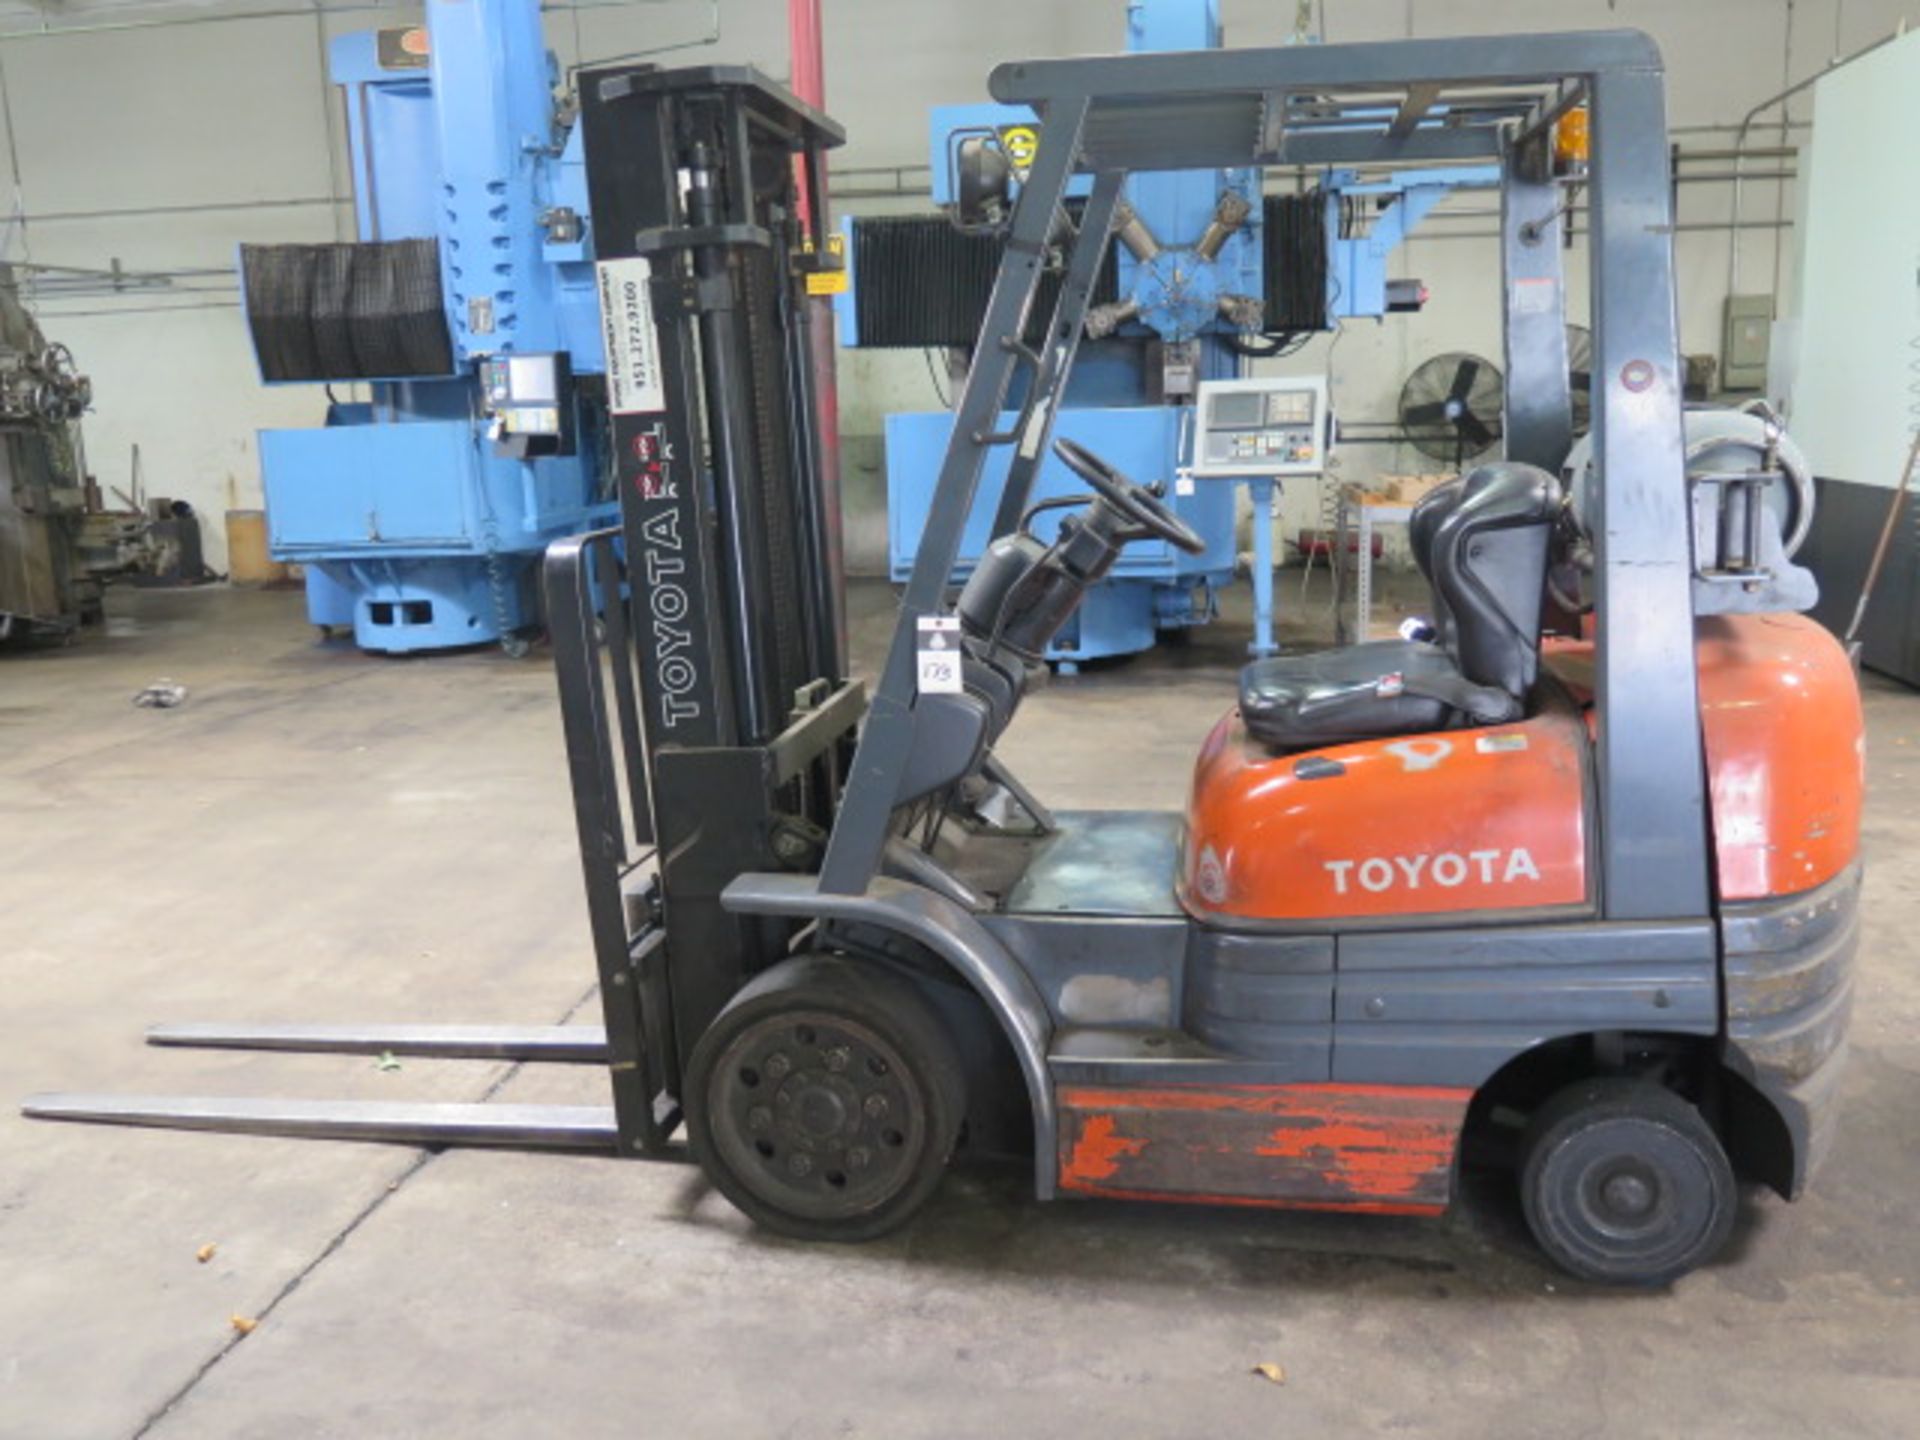 Toyota 42-6FGC20 4400 Lb Cap LPG Forklift s/n 61557 w/ 2-Stage Mast, 130” Lift Height, SOLD AS IS